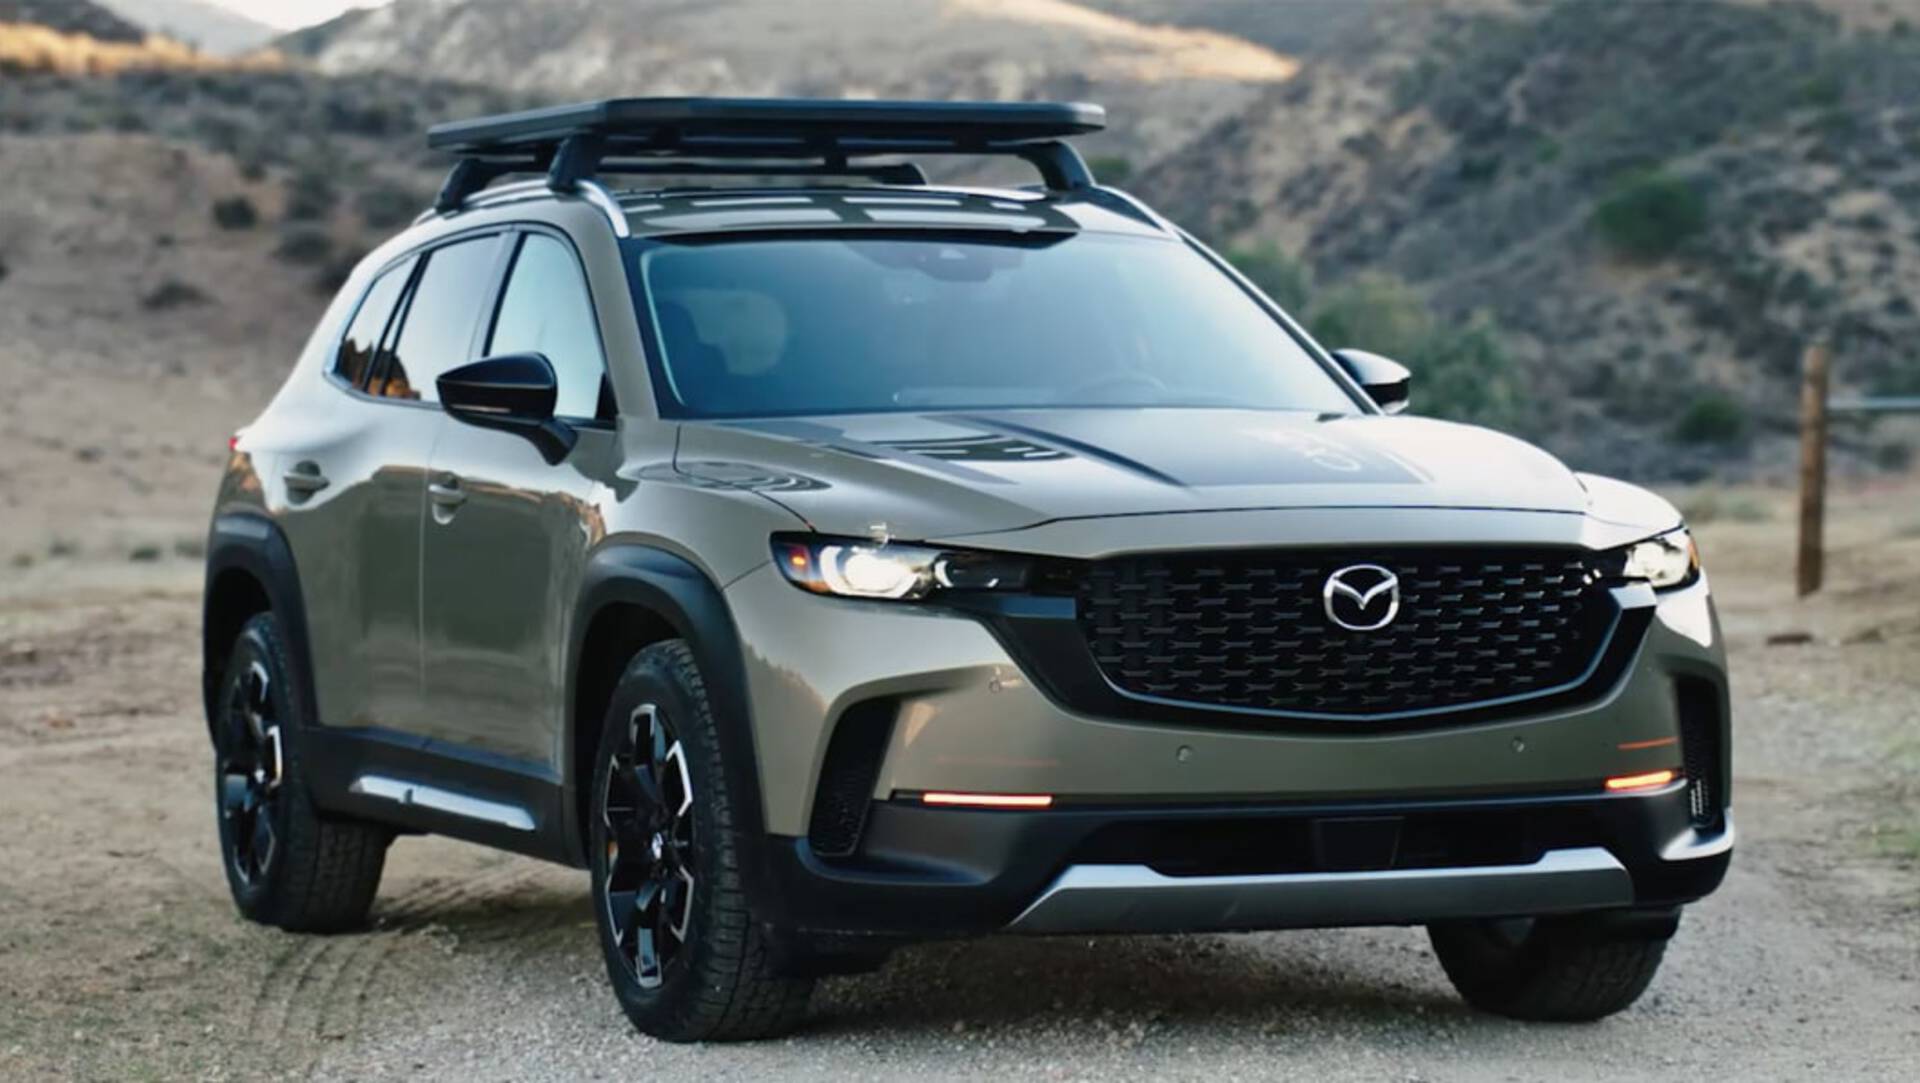 2023 Mazda CX50 revealed as outdoorsy compact SUV with hybrid